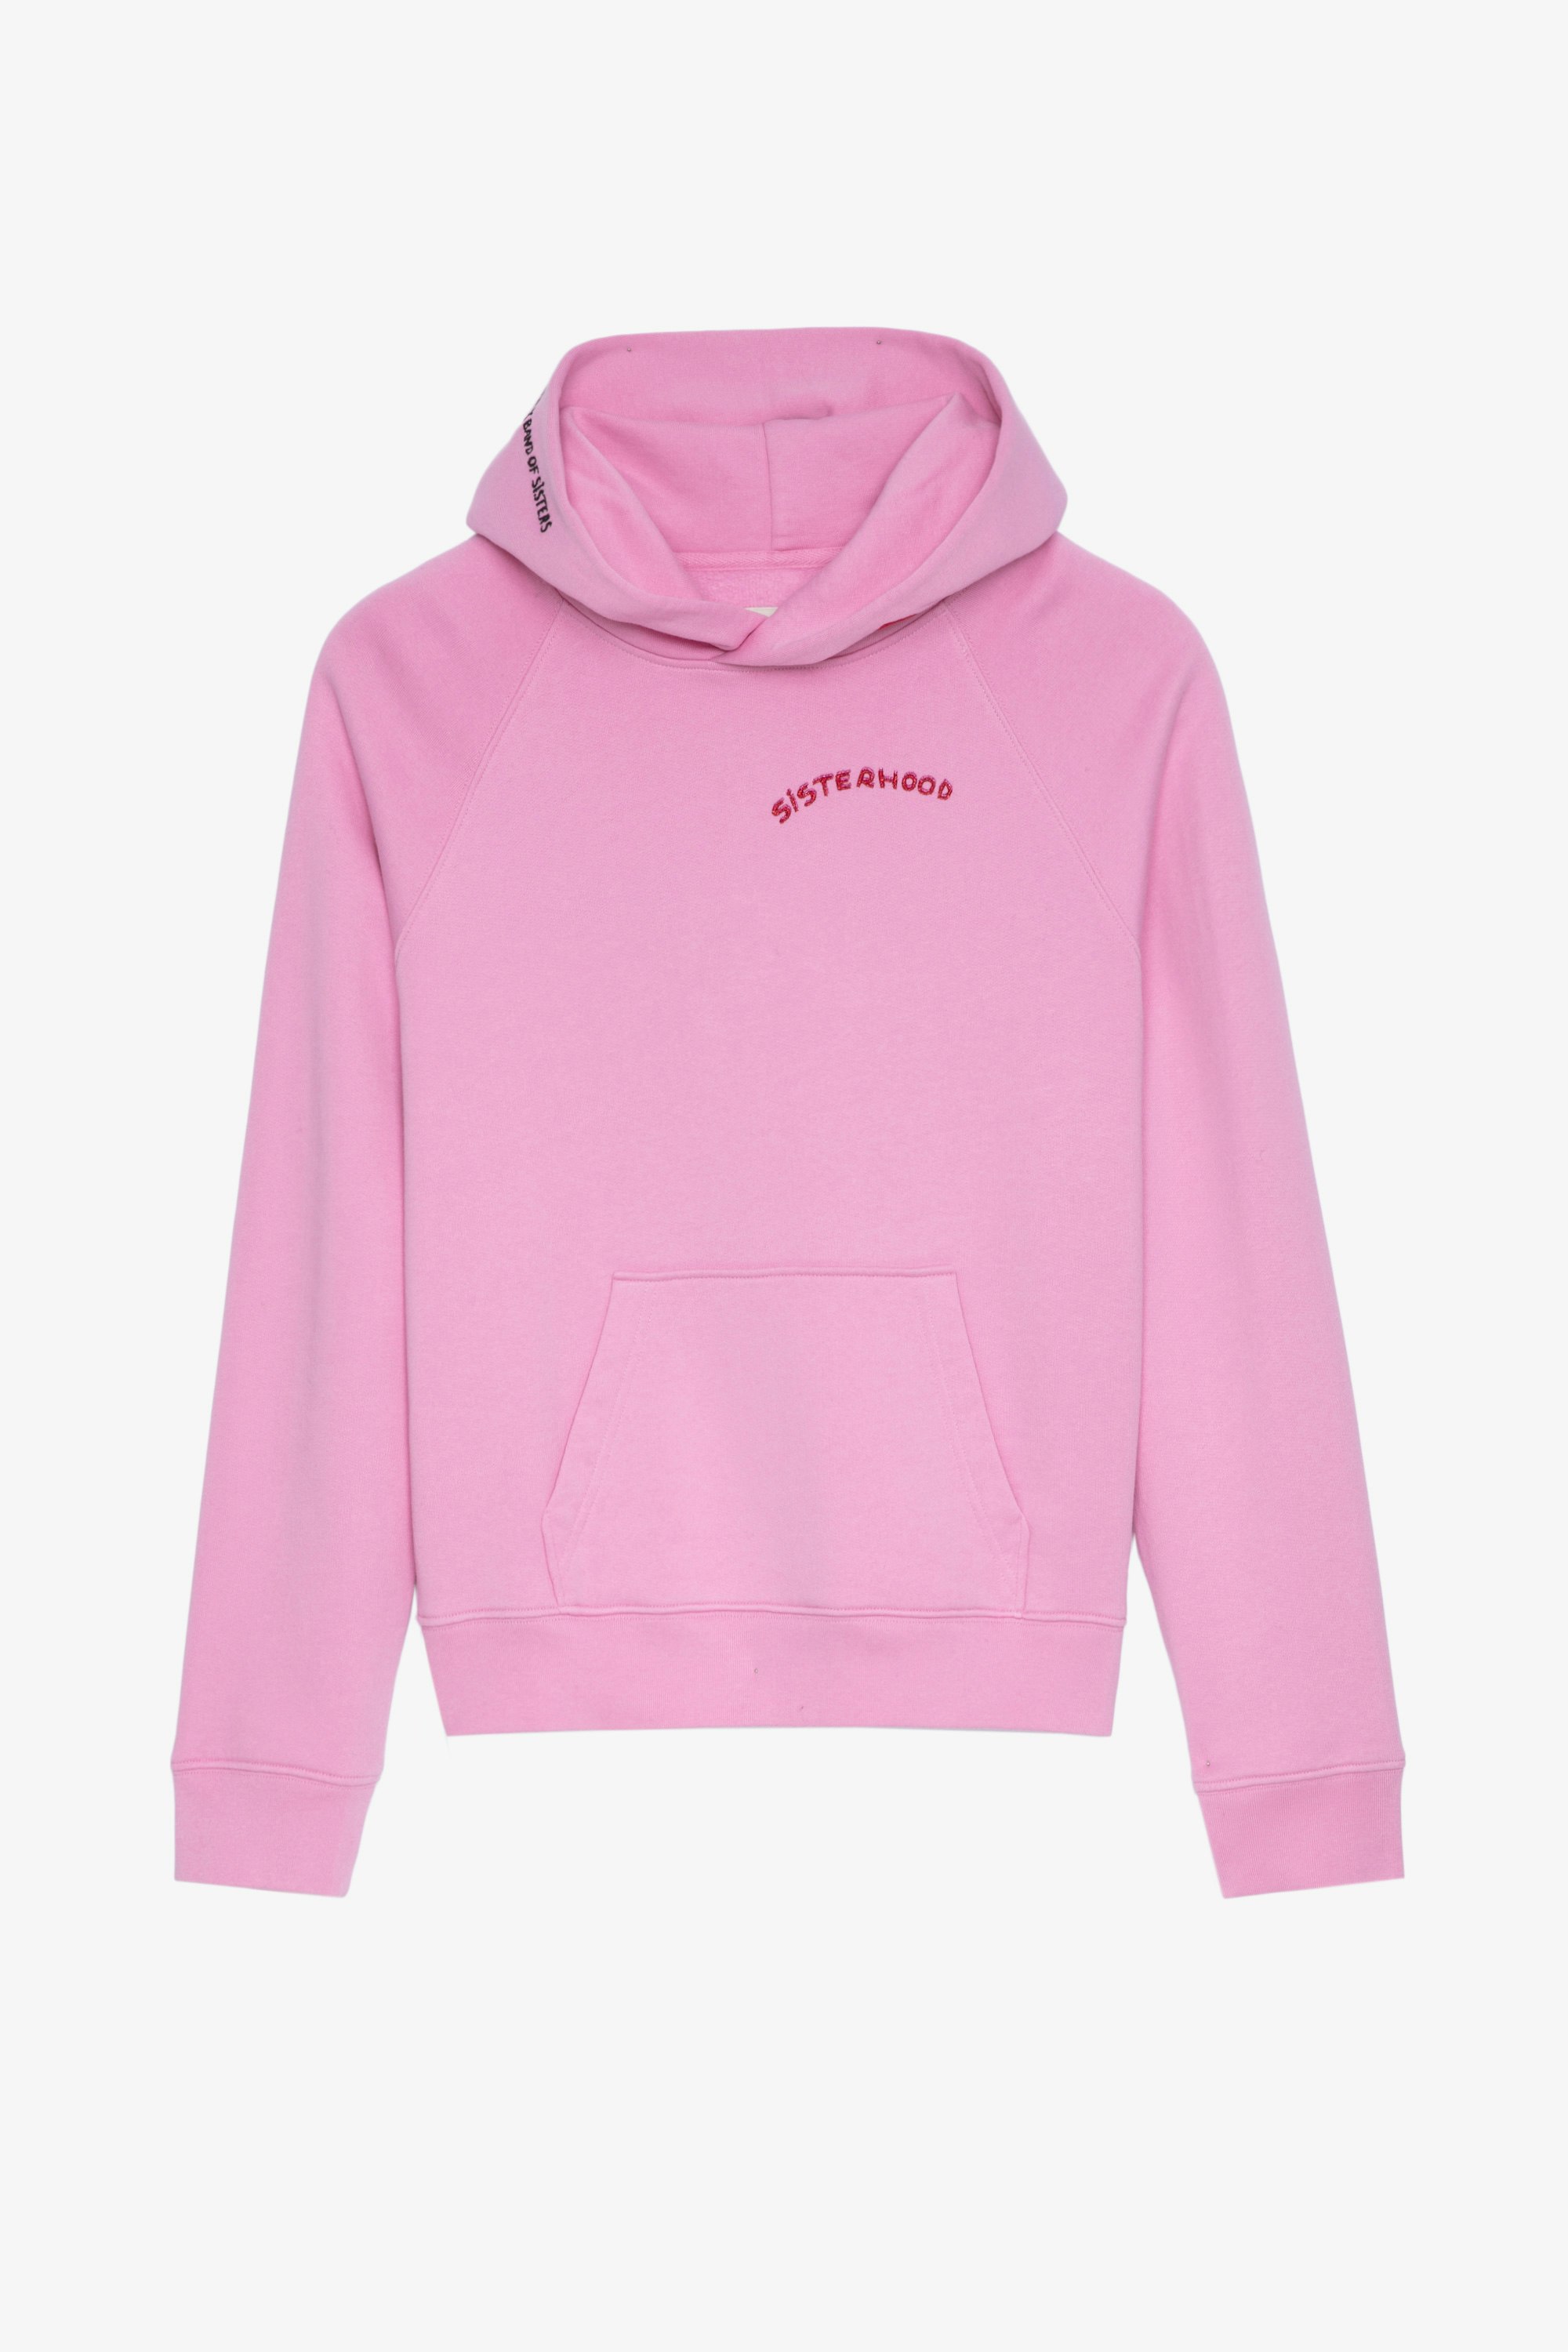 Georgy Band of Sisters Amour スウェット Women’s Band of Sisters pink cotton hooded sweatshirt